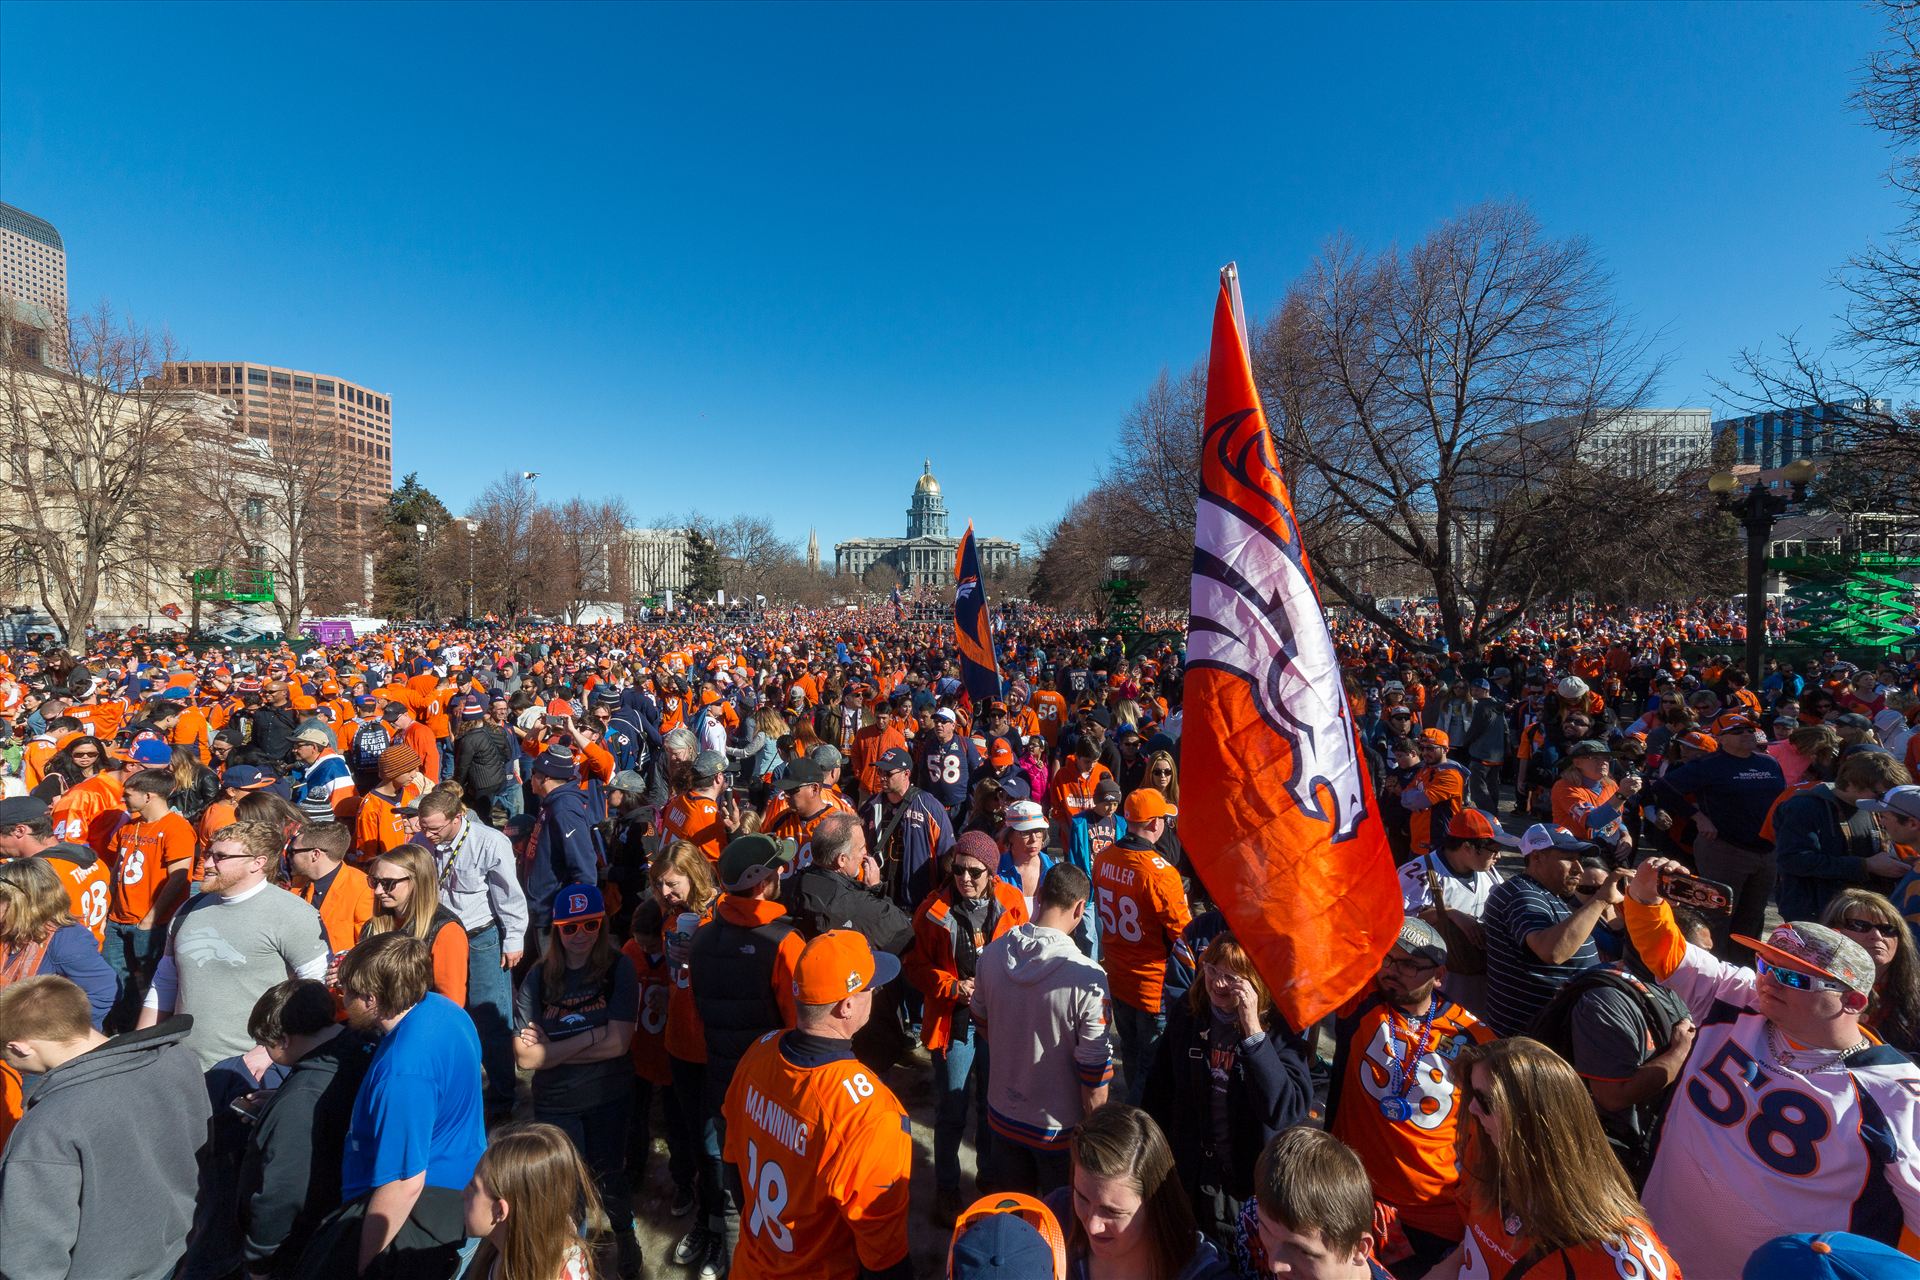 Broncos fans at Civic Park Fans of the Denver Broncos completely fill Civic Park in Denver Colorado. The state capitol building is visible in the center of the frame. by Scott Smith Photos